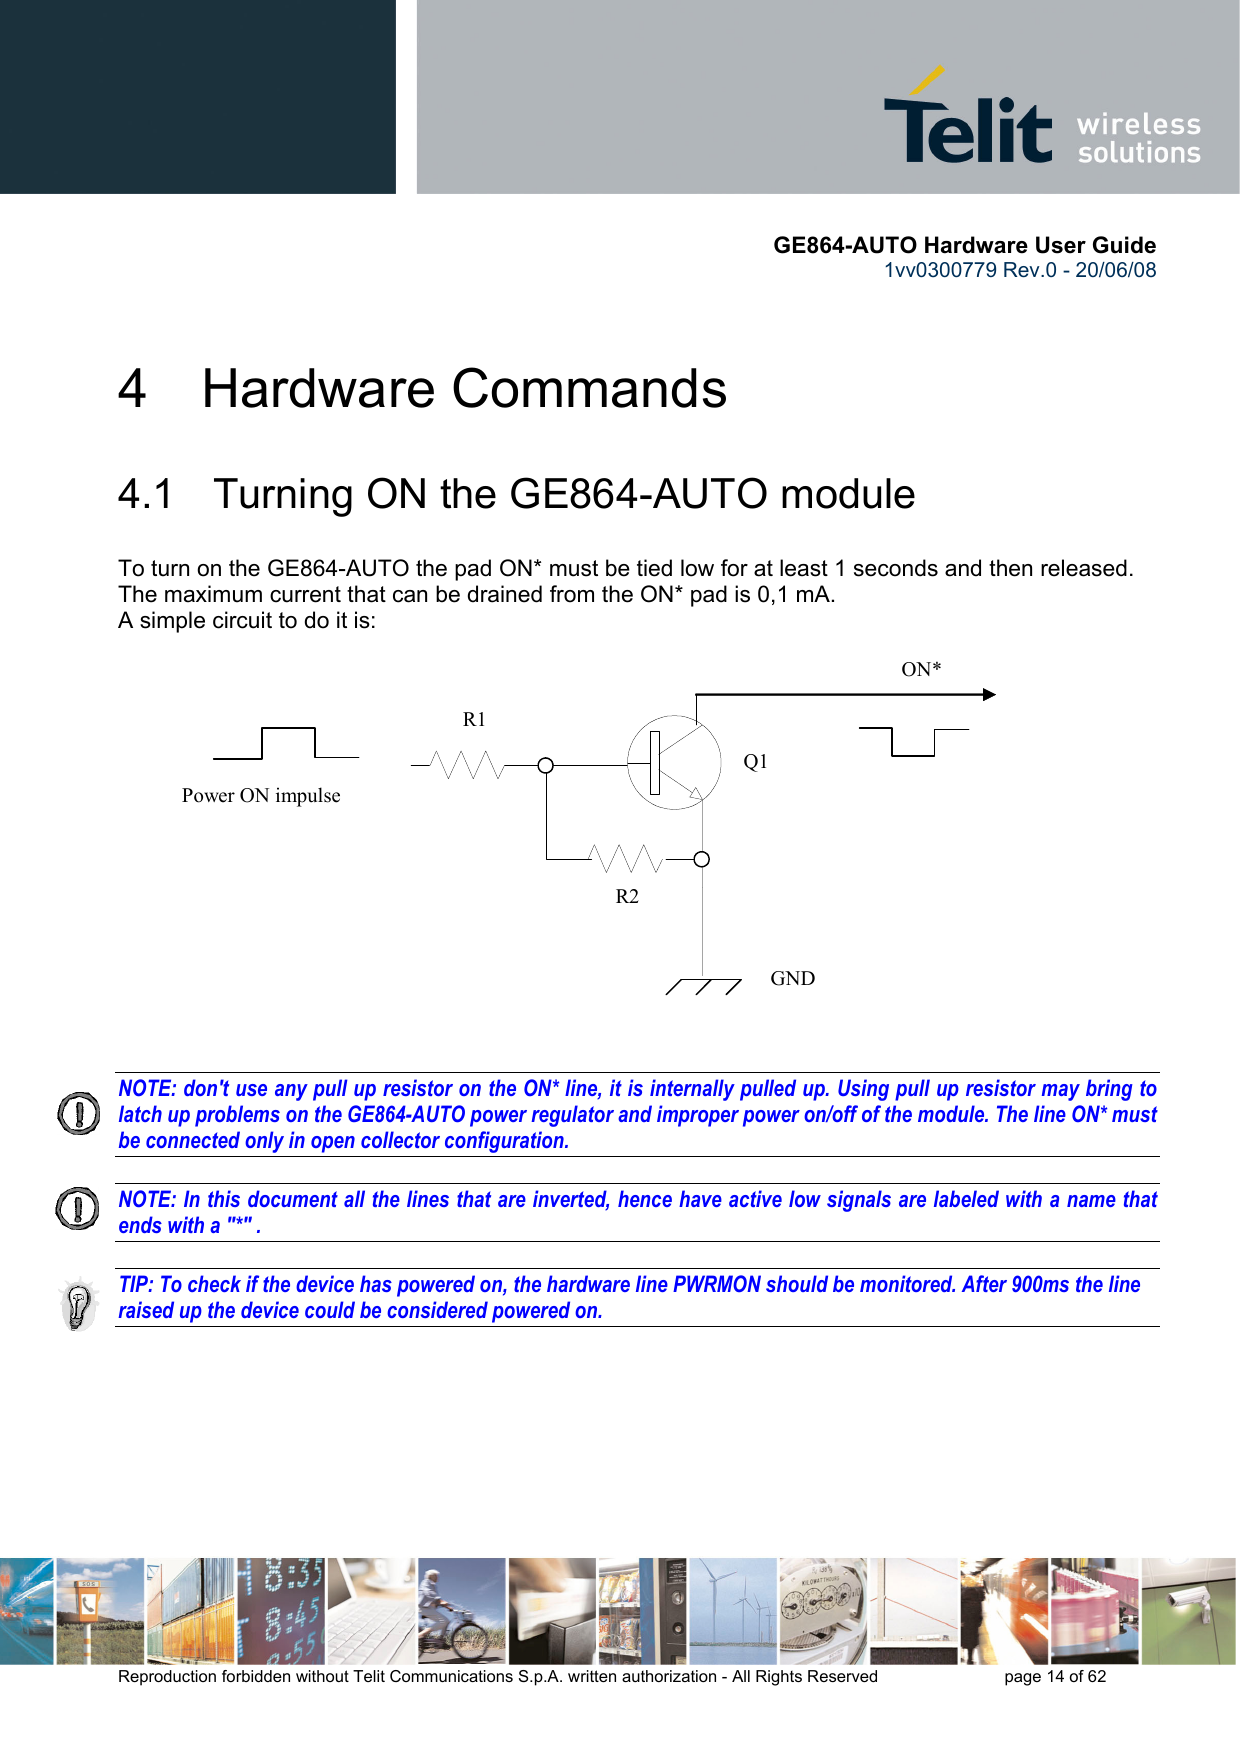       GE864-AUTO Hardware User Guide 1vv0300779 Rev.0 - 20/06/08      Reproduction forbidden without Telit Communications S.p.A. written authorization - All Rights Reserved    page 14 of 62  4 Hardware Commands 4.1   Turning ON the GE864-AUTO module To turn on the GE864-AUTO the pad ON* must be tied low for at least 1 seconds and then released. The maximum current that can be drained from the ON* pad is 0,1 mA. A simple circuit to do it is:   NOTE: don&apos;t use any pull up resistor on the ON* line, it is internally pulled up. Using pull up resistor may bring to latch up problems on the GE864-AUTO power regulator and improper power on/off of the module. The line ON* must be connected only in open collector configuration.  NOTE: In this document all the lines that are inverted, hence have active low signals are labeled with a name that ends with a &quot;*&quot; .  TIP: To check if the device has powered on, the hardware line PWRMON should be monitored. After 900ms the line raised up the device could be considered powered on.      ON* Power ON impulse   GND R1 R2 Q1 